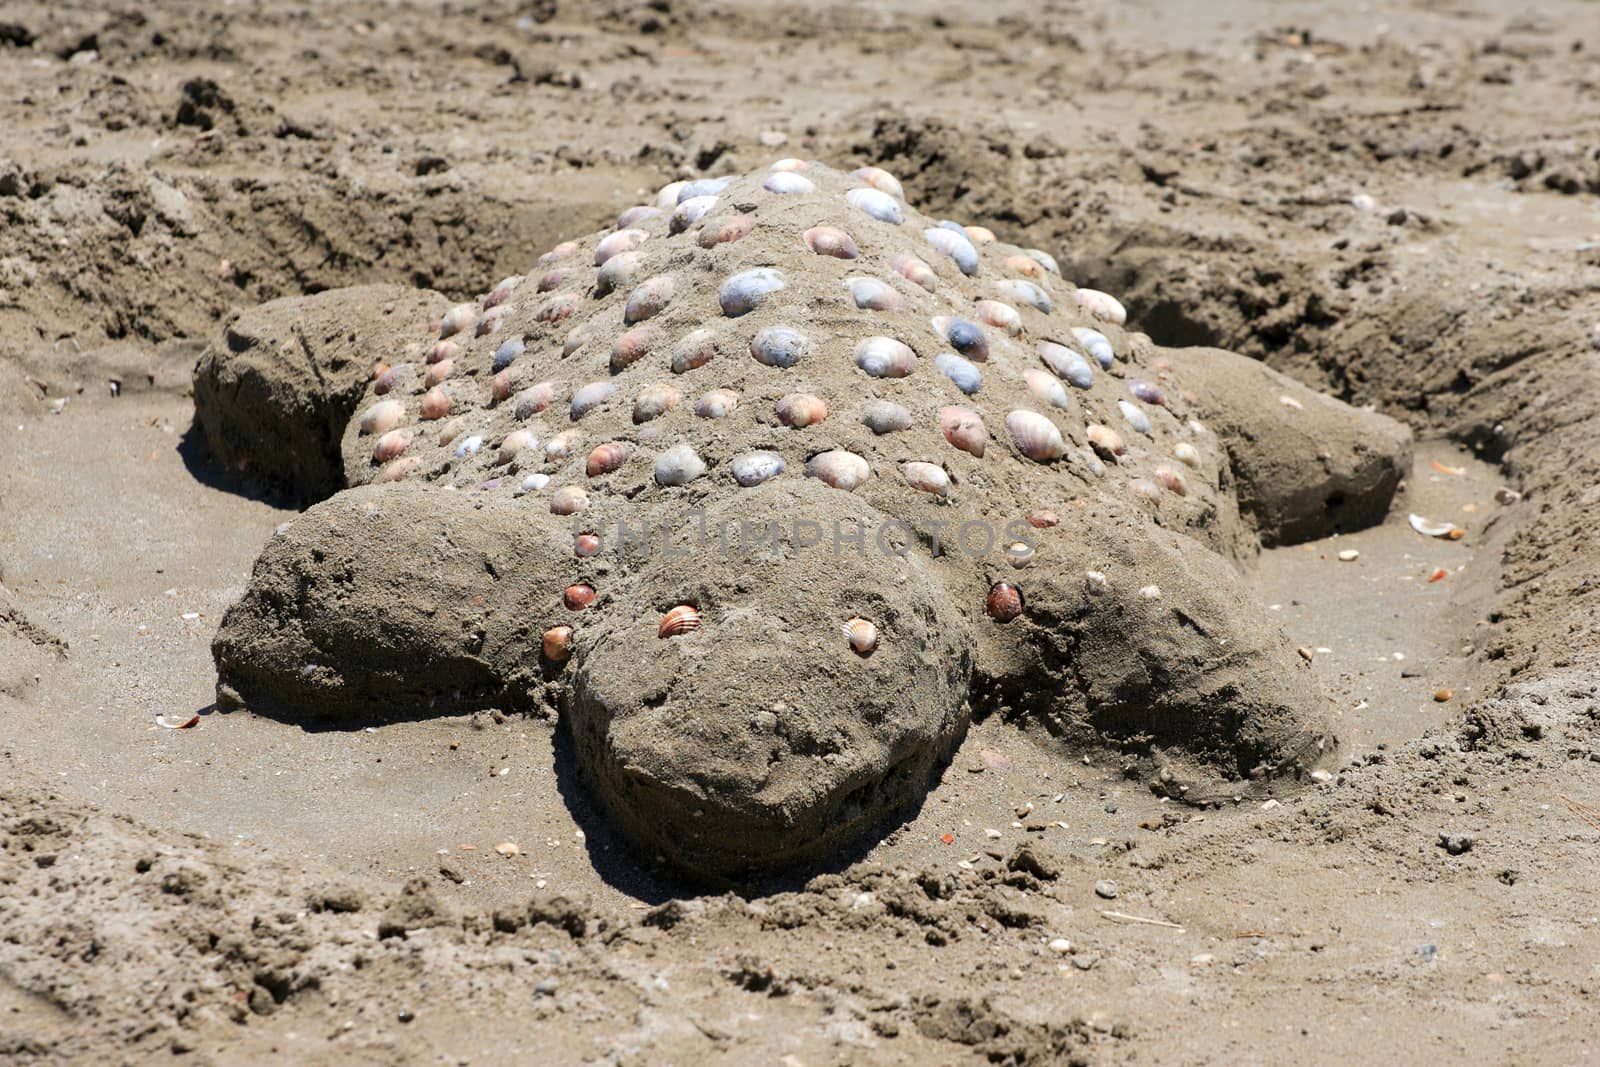 Sand turtle on the beach by Netfalls